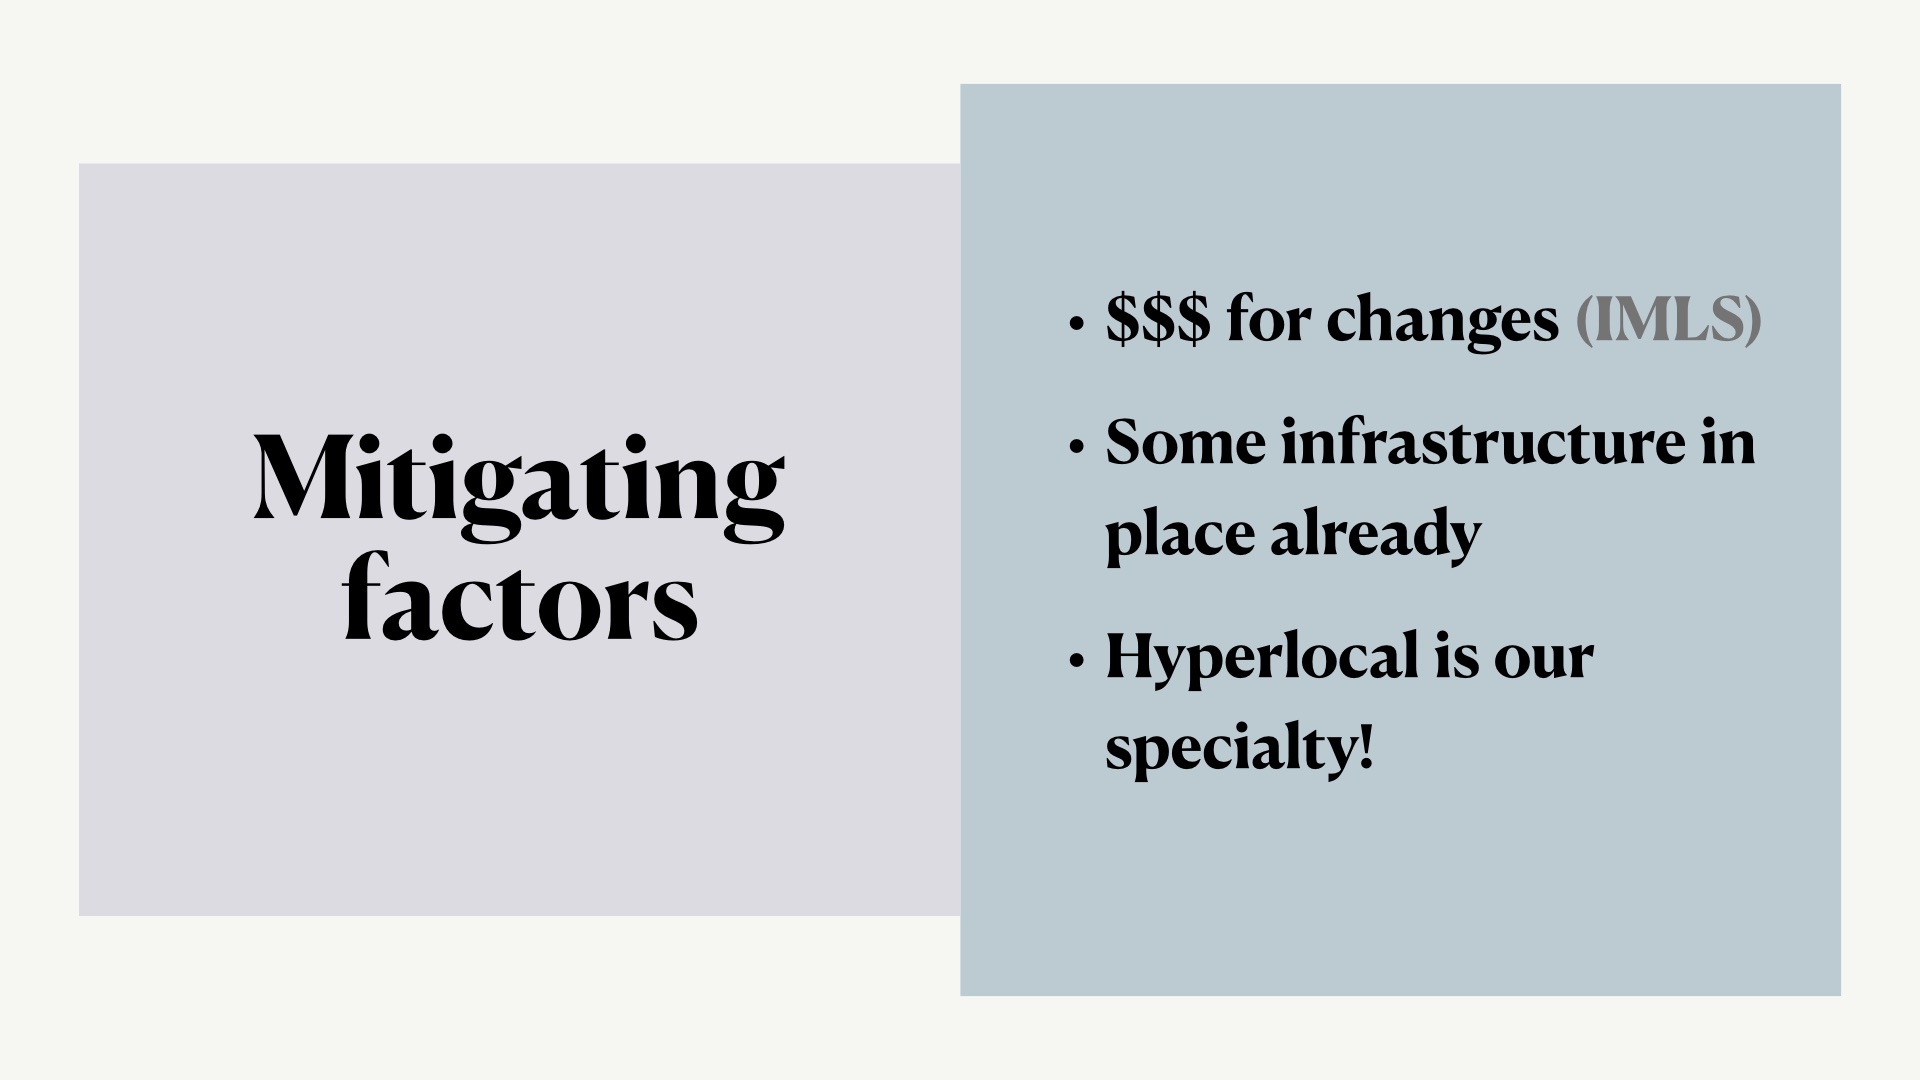 [caption: mitigating factors: $$$ for changes (IMLS); Some infrastructure in place already; Hyperlocal is our specialty!]